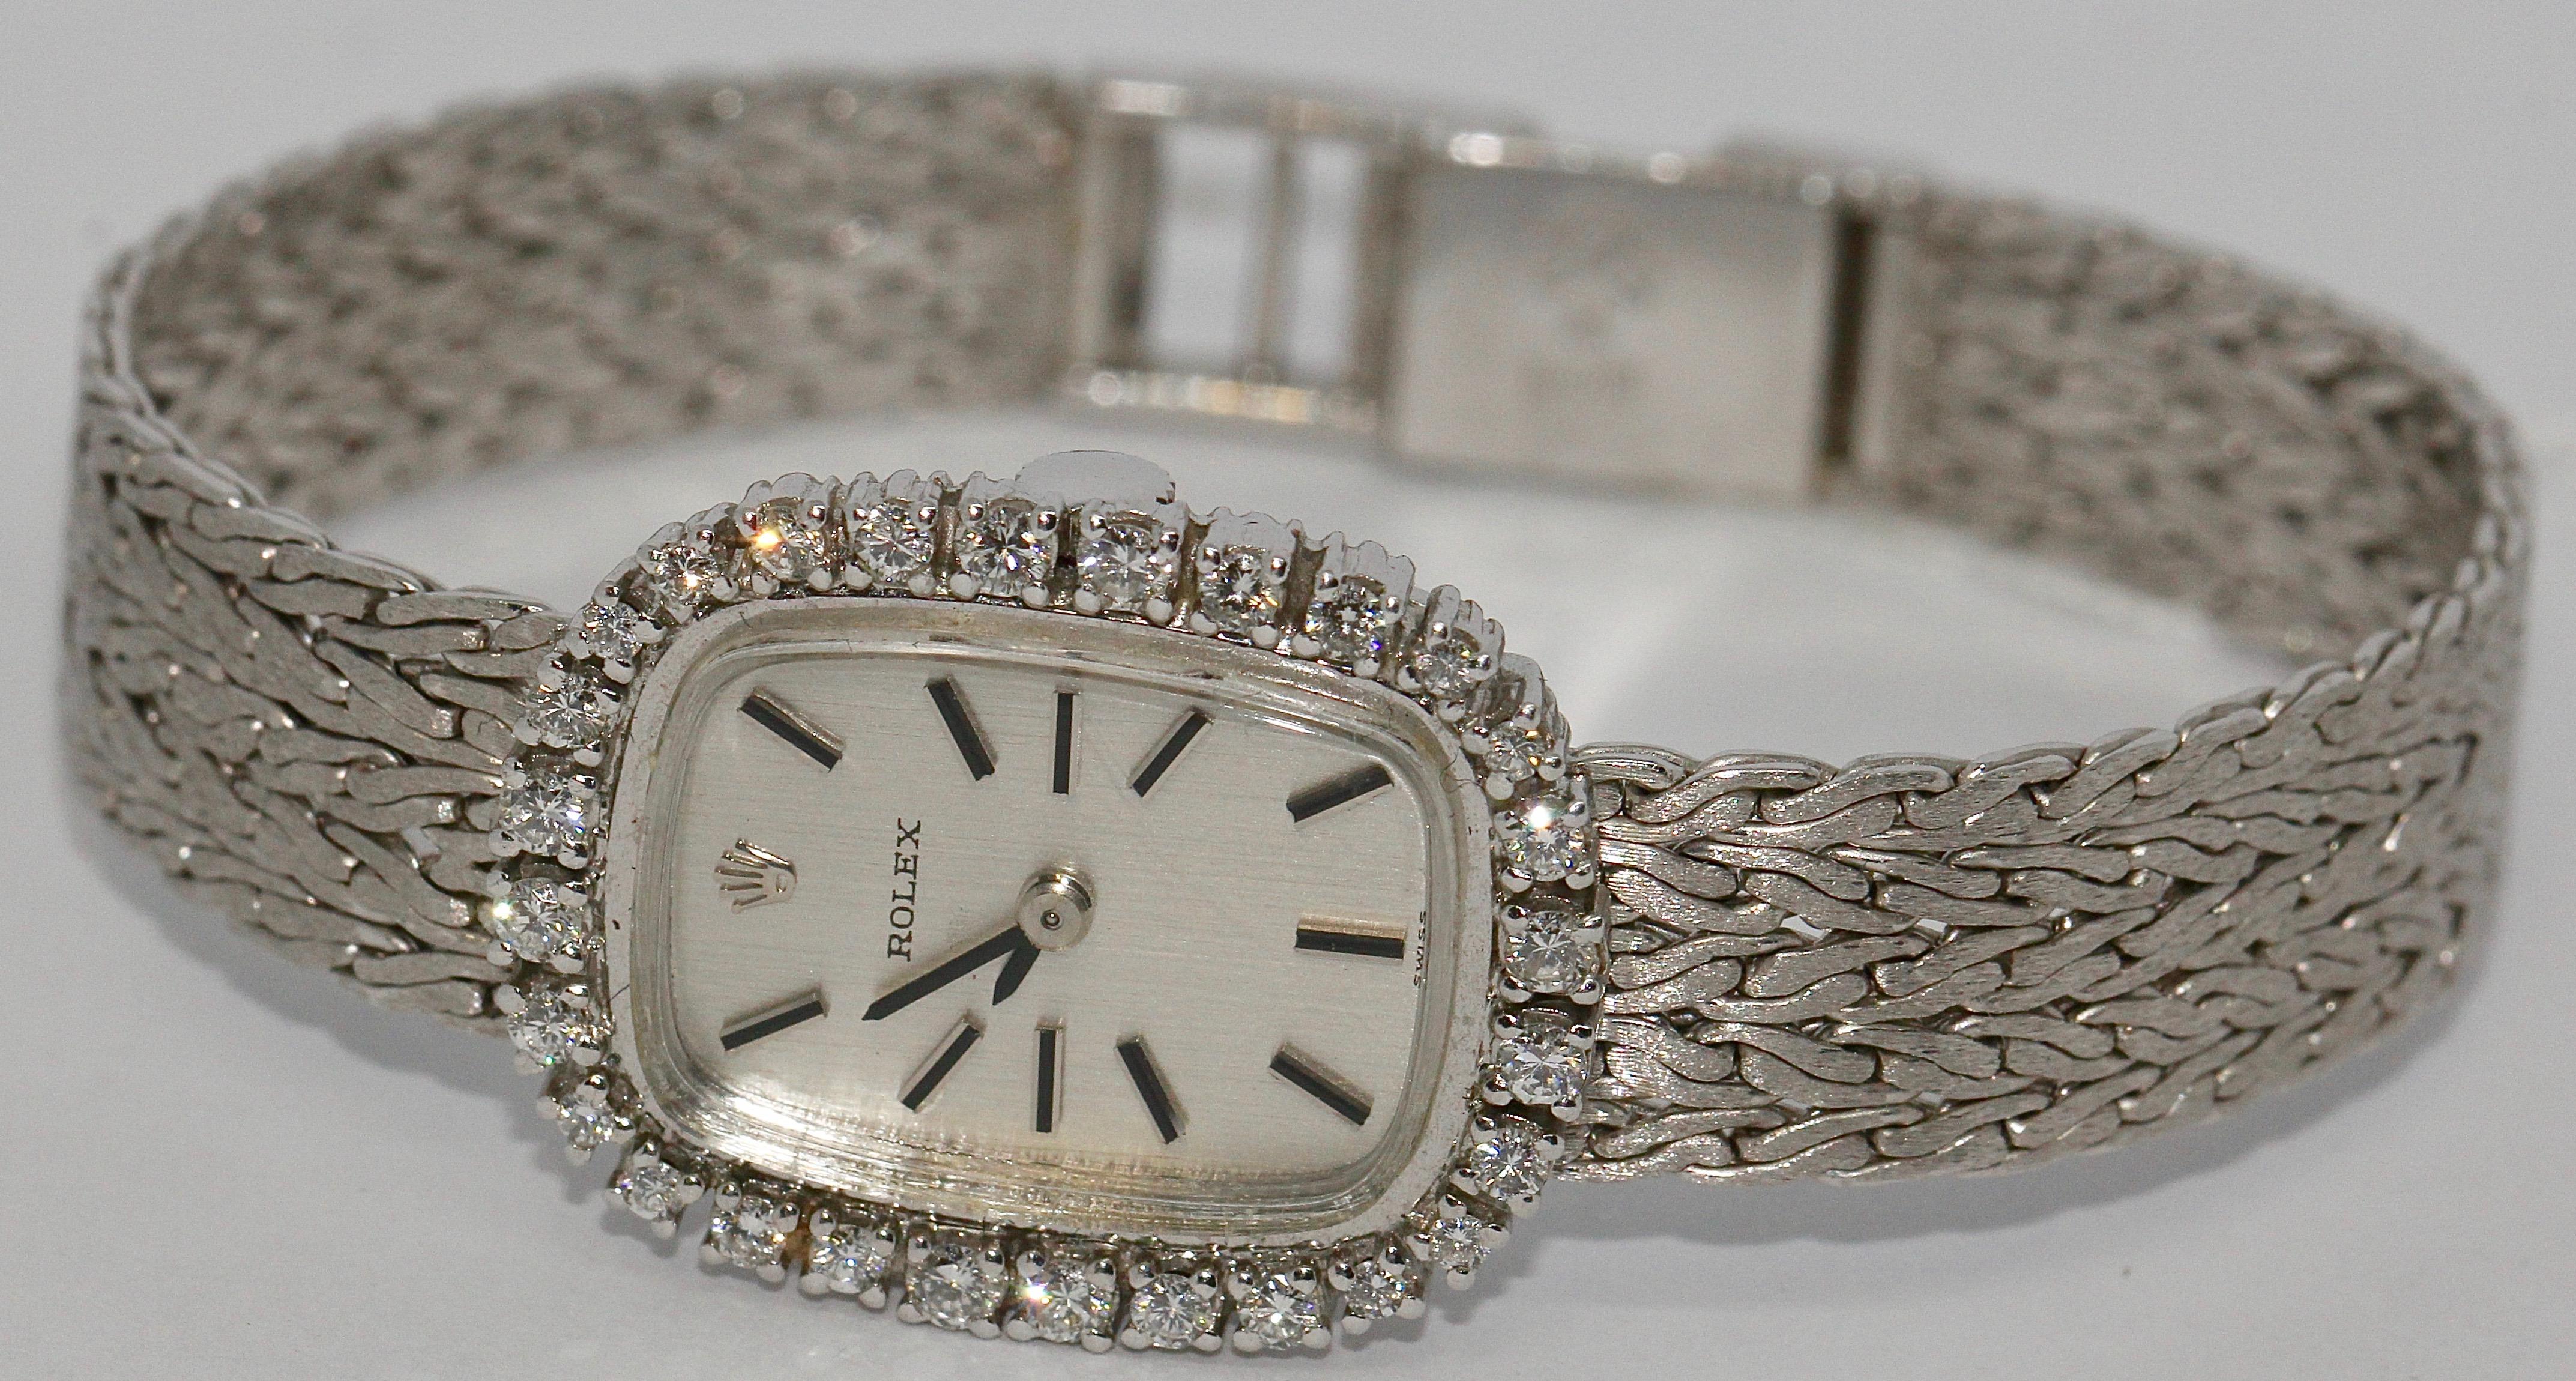 Elegant, fine and extremely rare Rolex ladies watch in 18 Karat white gold.

Manual wind movement.
Bezel with diamonds.

The watch comes with a certificate of authenticity.